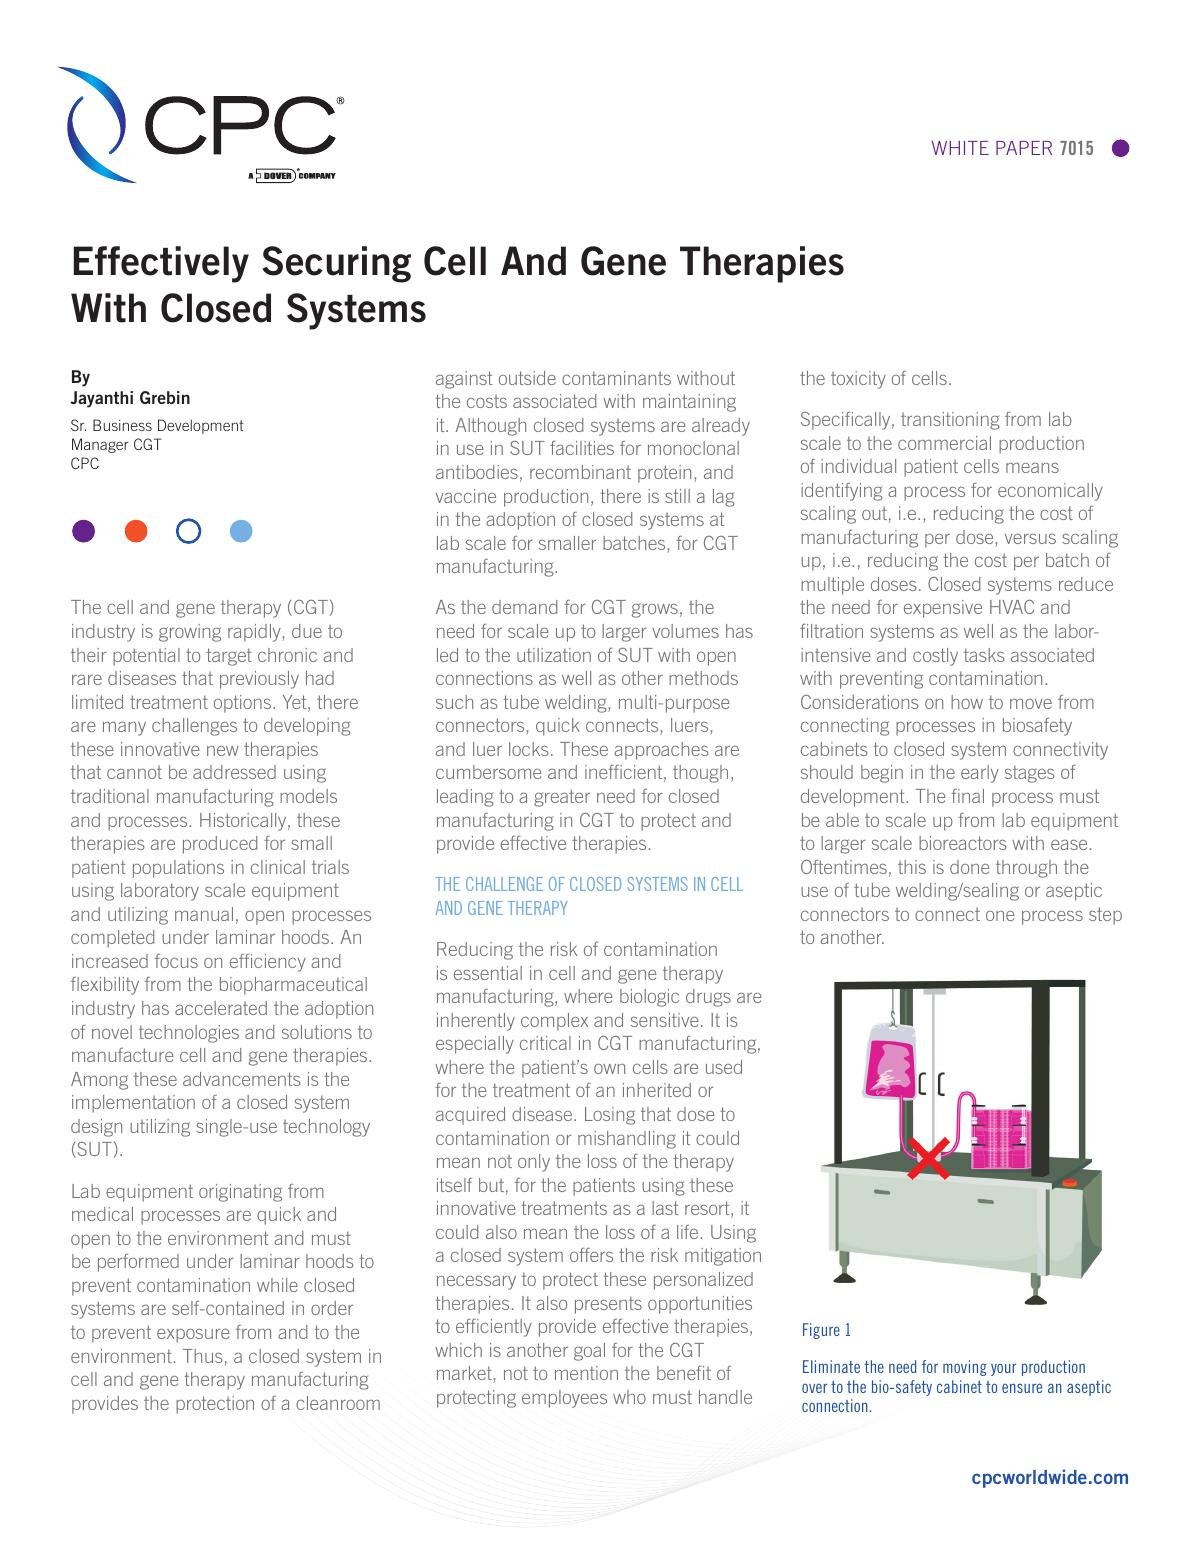 Effectively Securing Cell And Gene Therapies With Closed Systems White Paper